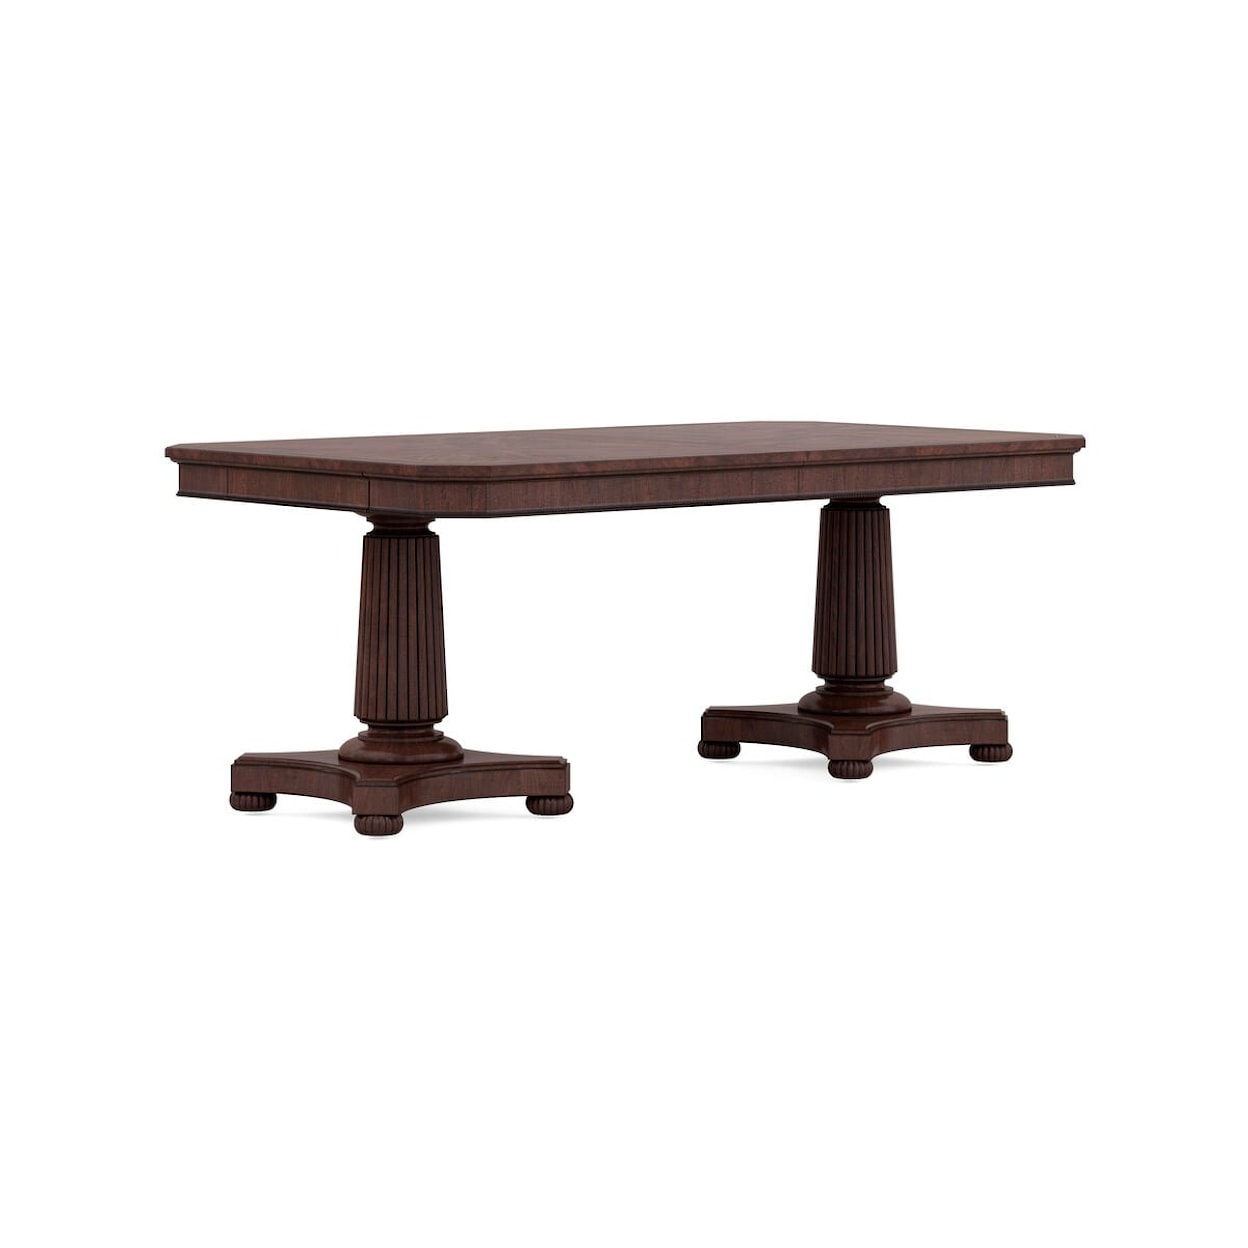 A.R.T. Furniture Inc 328 - Revival Double Pedestal Dining Table